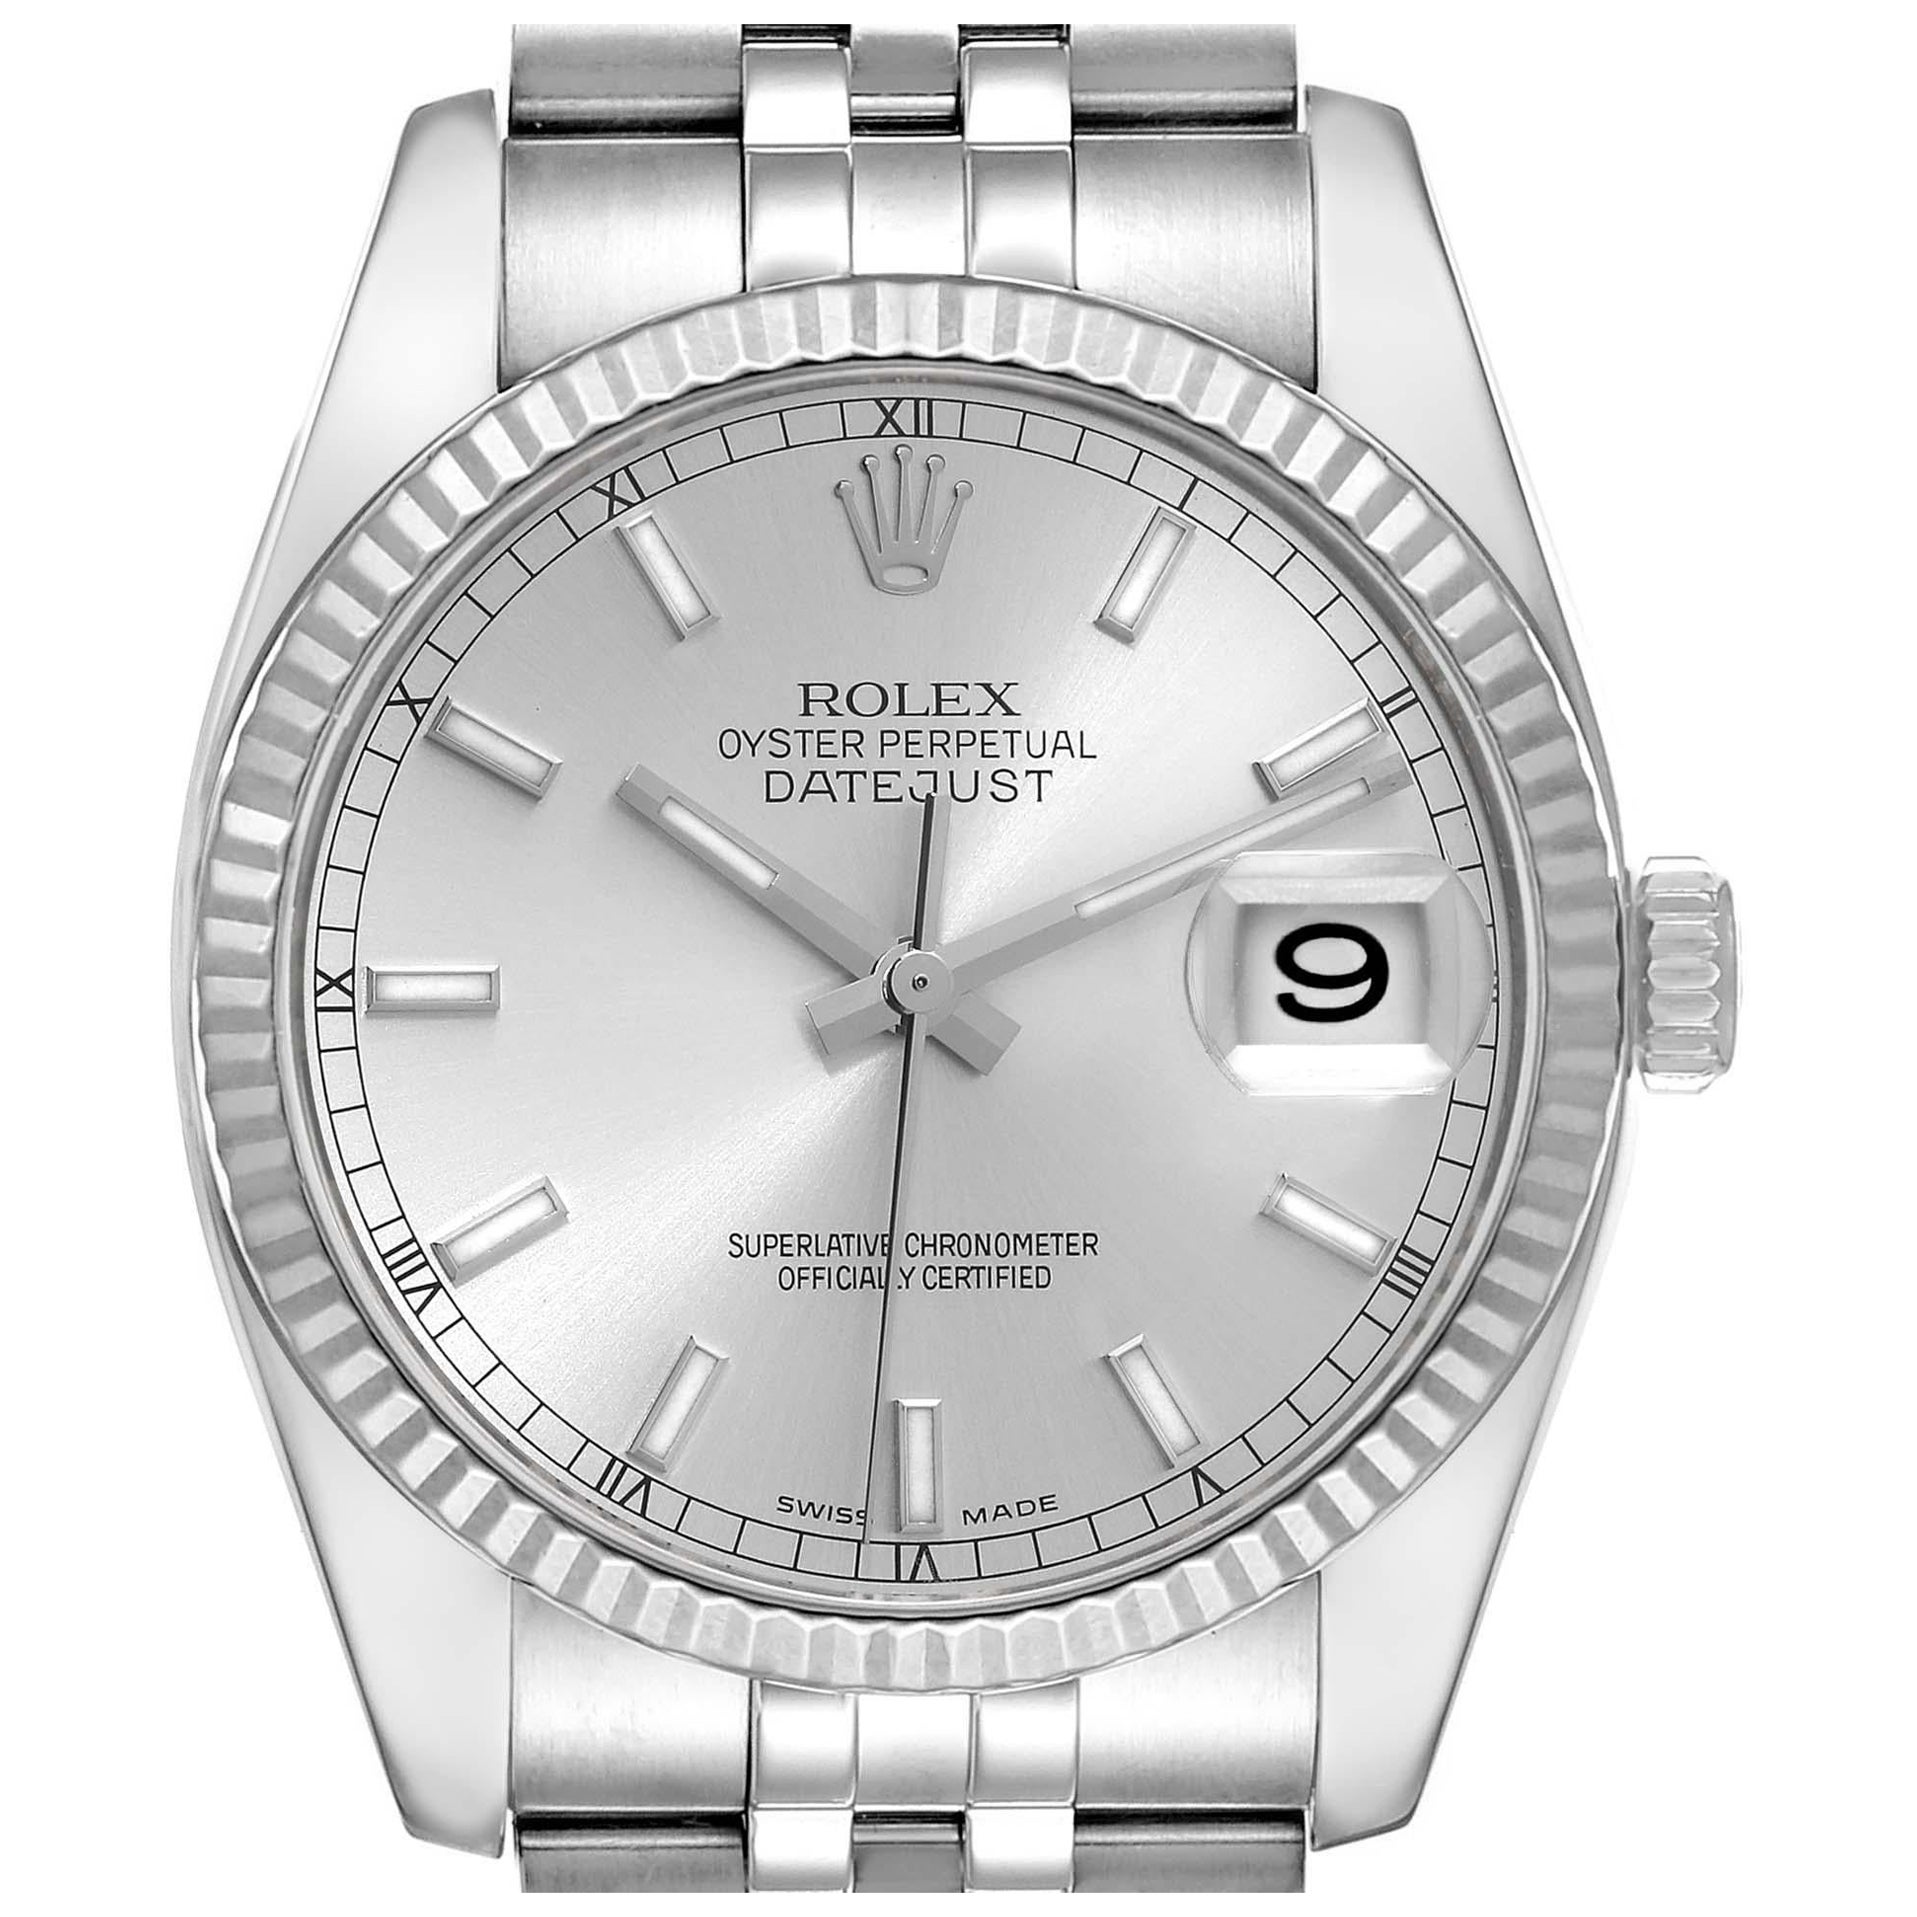 Rolex Datejust Steel White Gold Silver Dial Mens Watch 116234 Box Papers For Sale